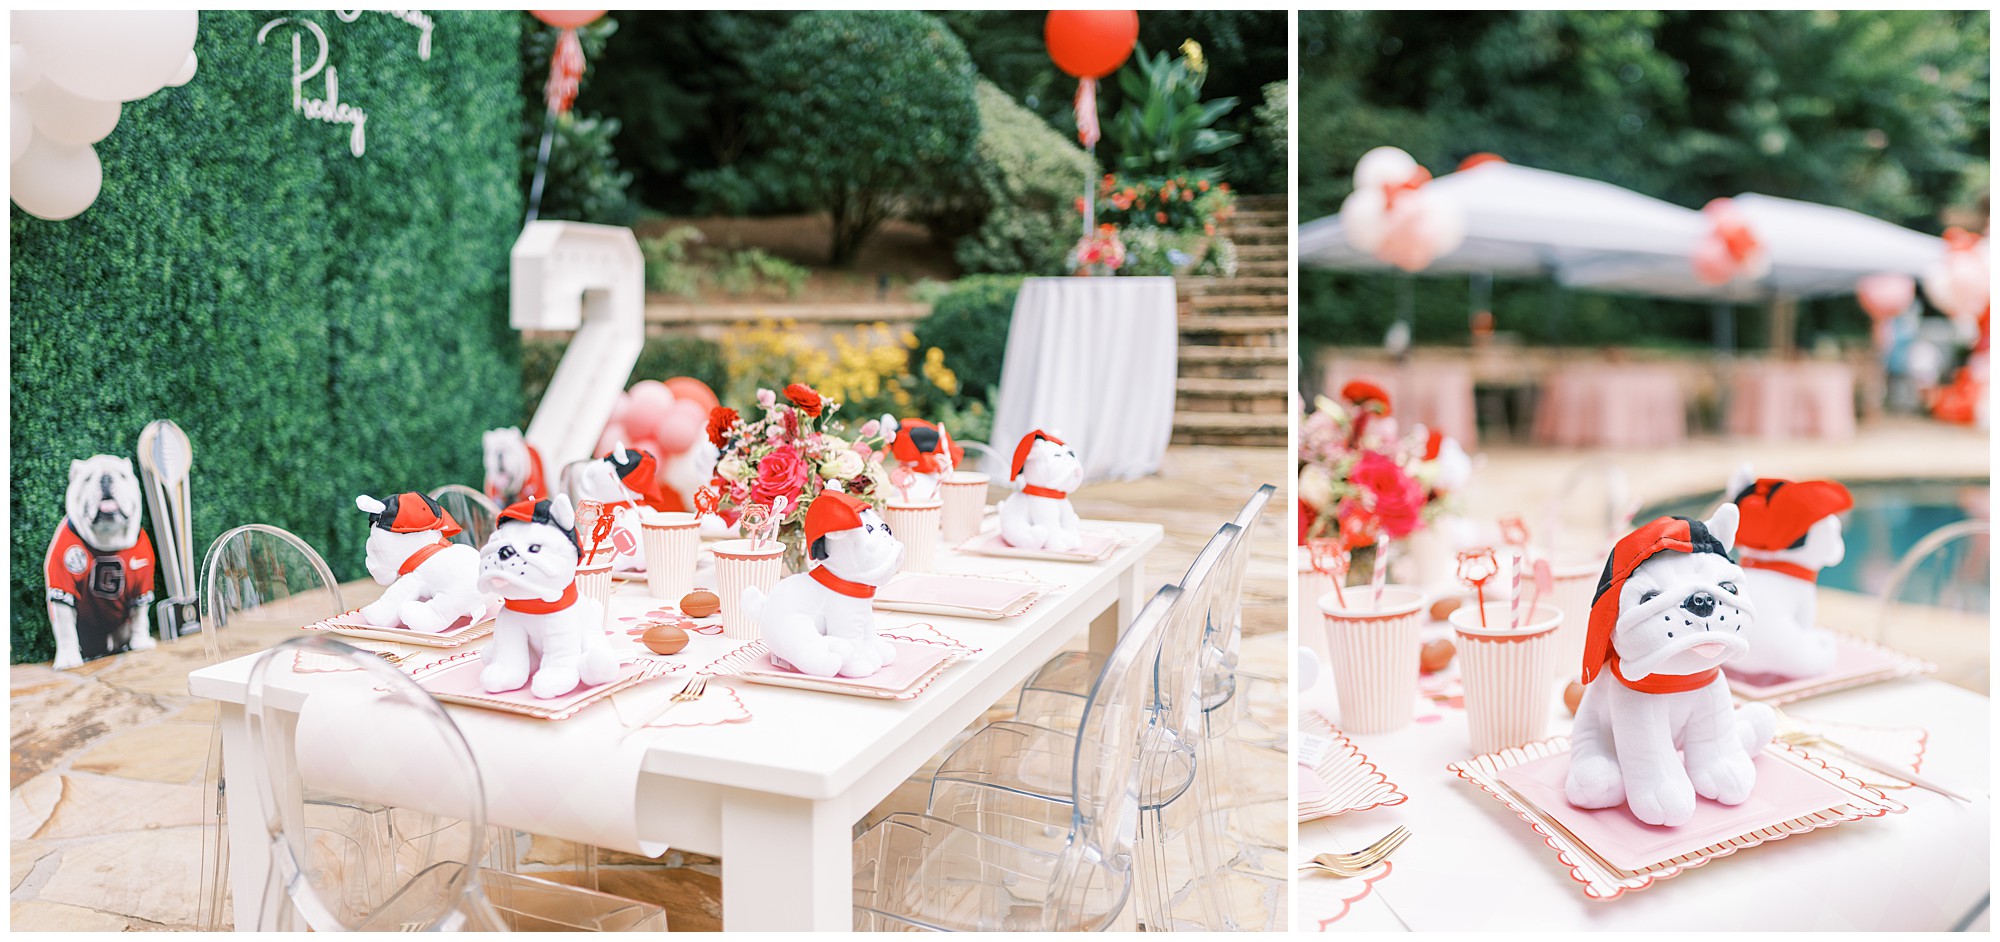 A children's table set up with paper plates and UGA themed birthday decor.